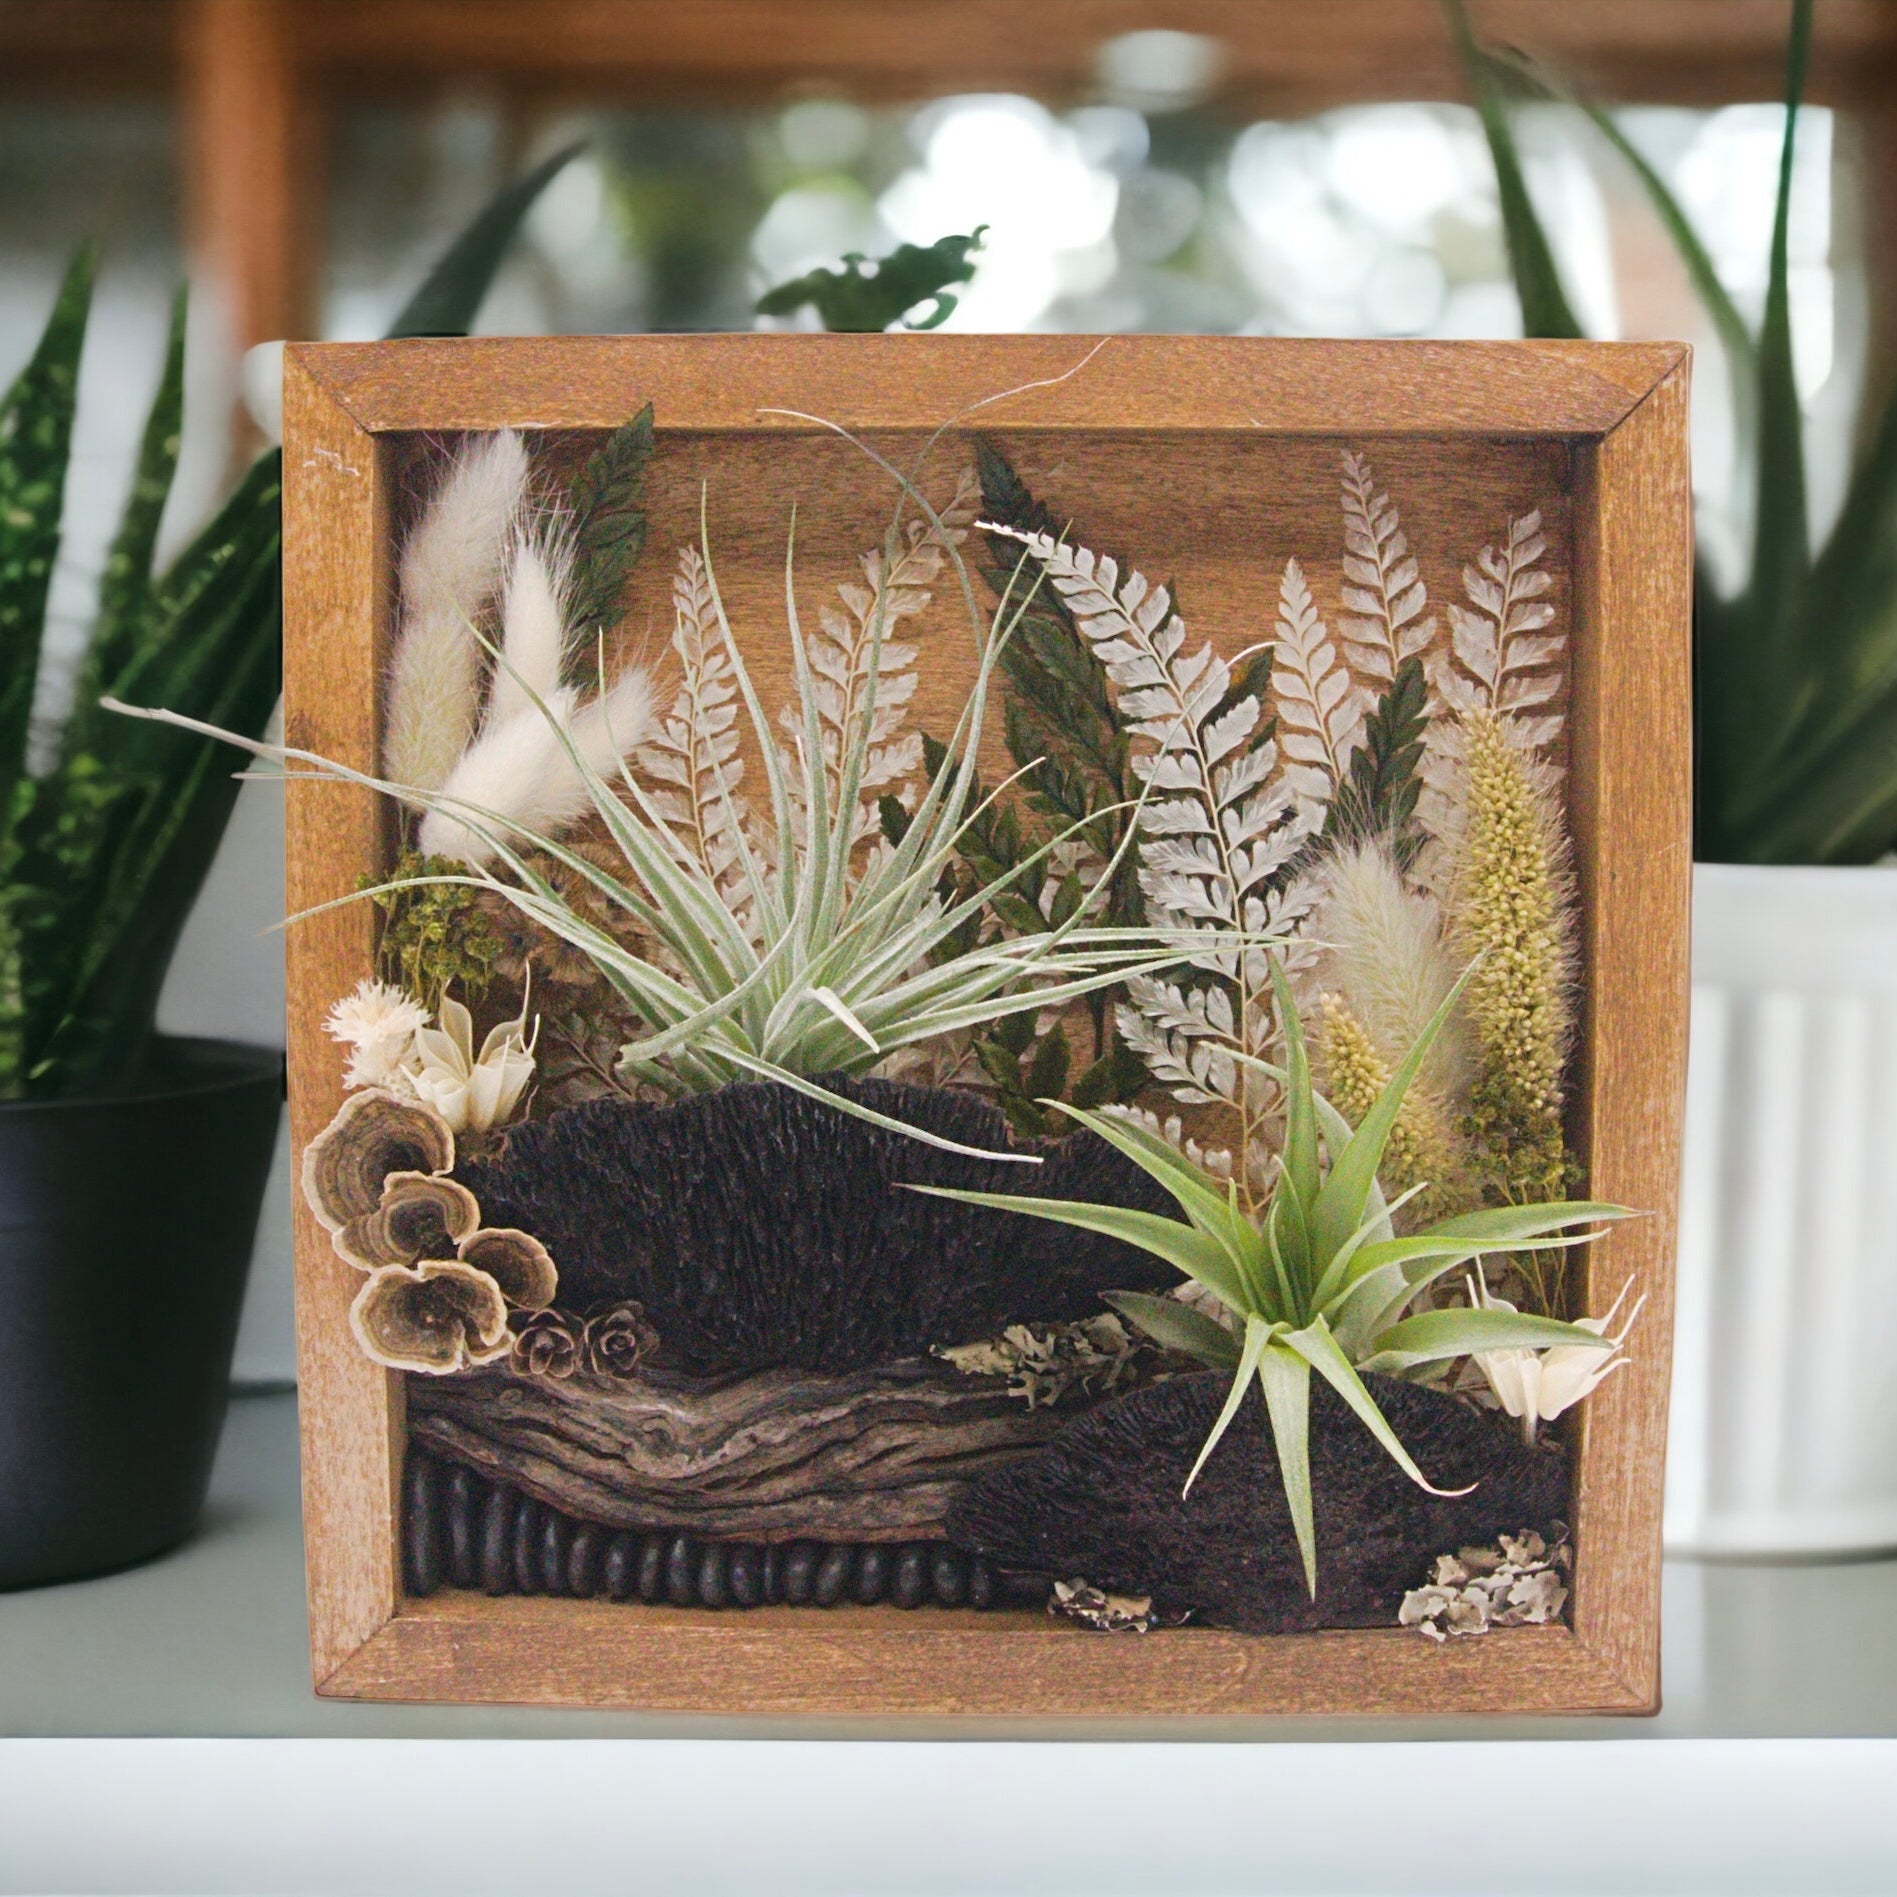 Antique walnut-stained wooden box frame filled with dried flowers, moss, wood, dried mushrooms and two airplants